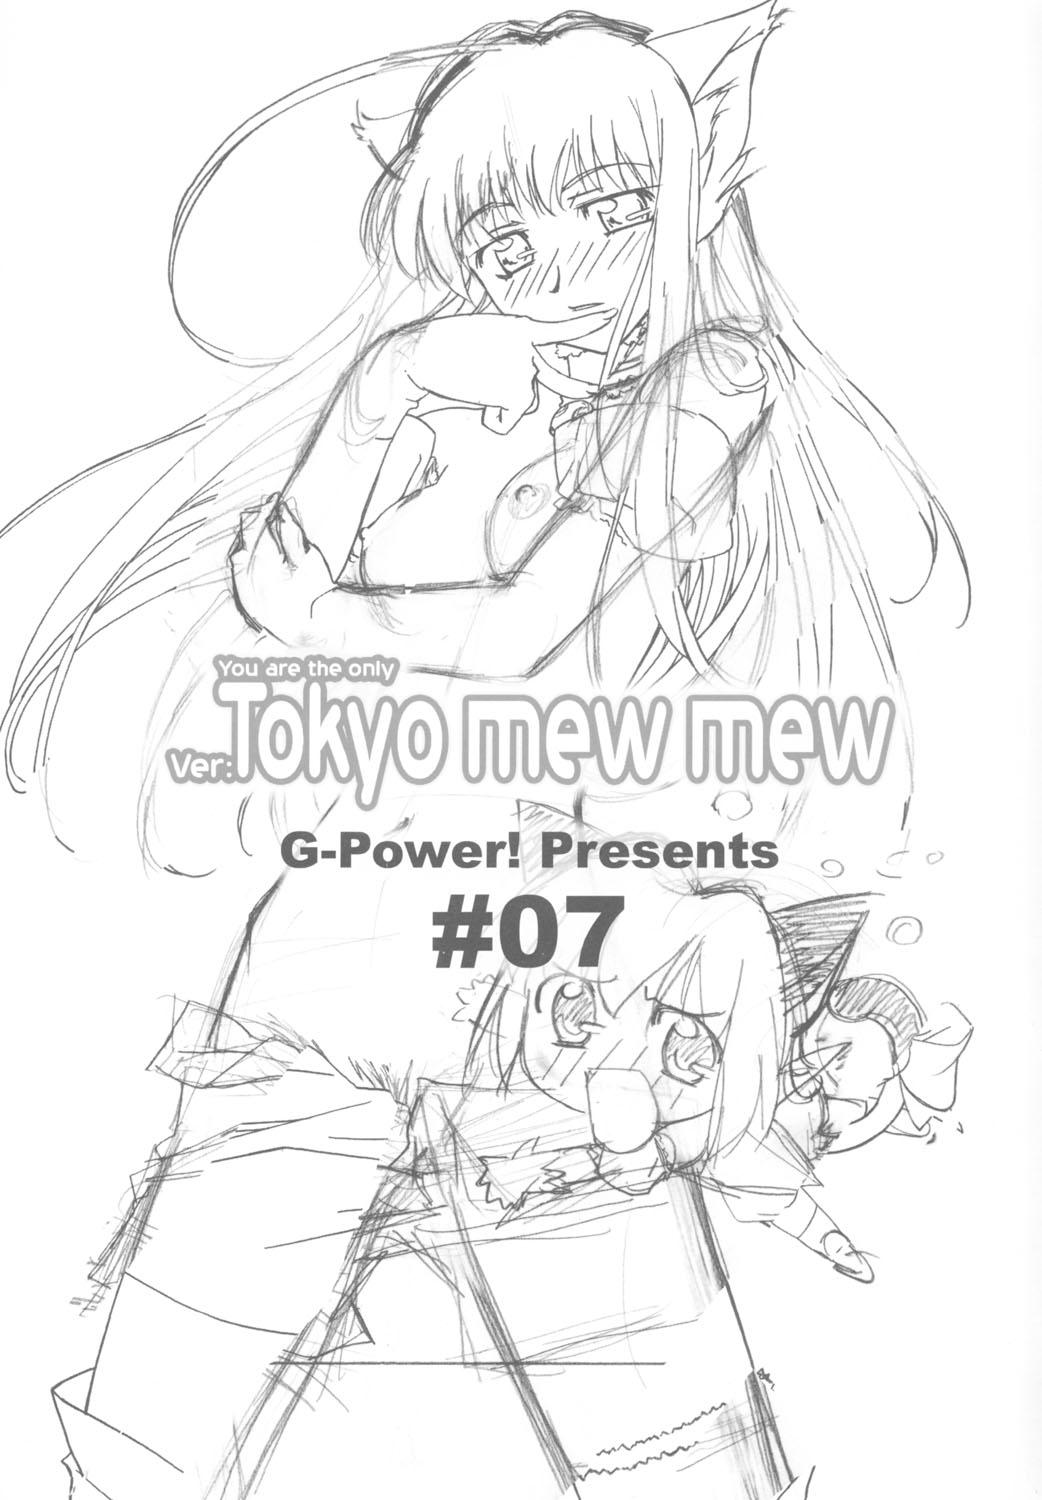 Amatuer YOU ARE THE ONLY version:Tokyo mew mew - Tokyo mew mew Spanish - Page 2